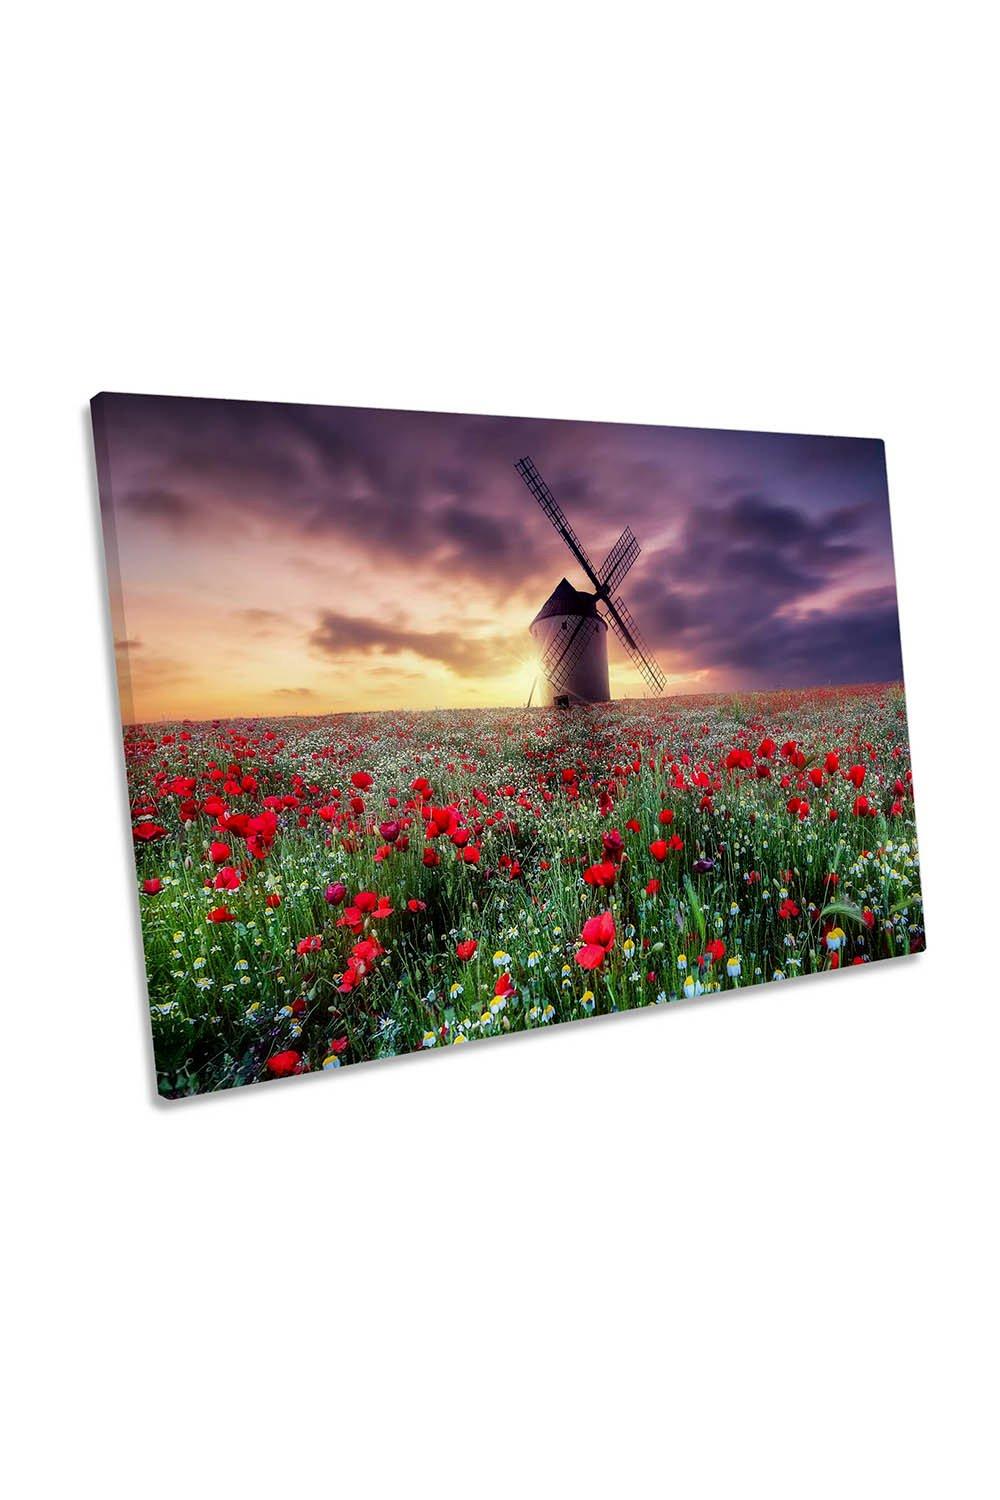 Red Poppy Flowers by the Windmill Canvas Wall Art Picture Print